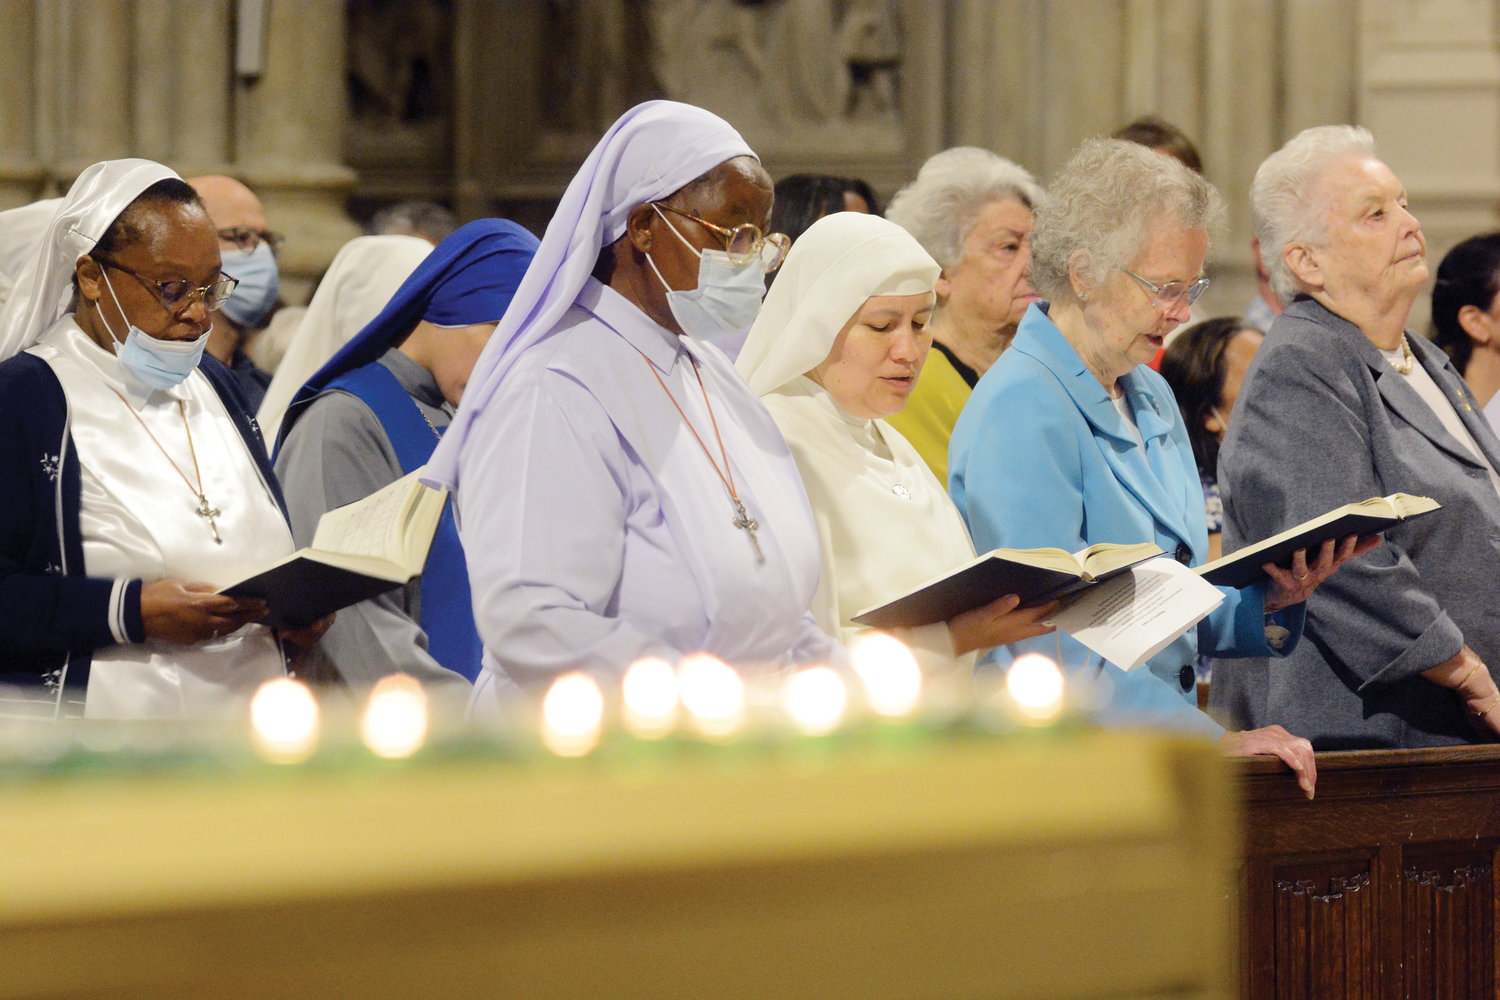 Religious sisters pray together during the morning liturgy.